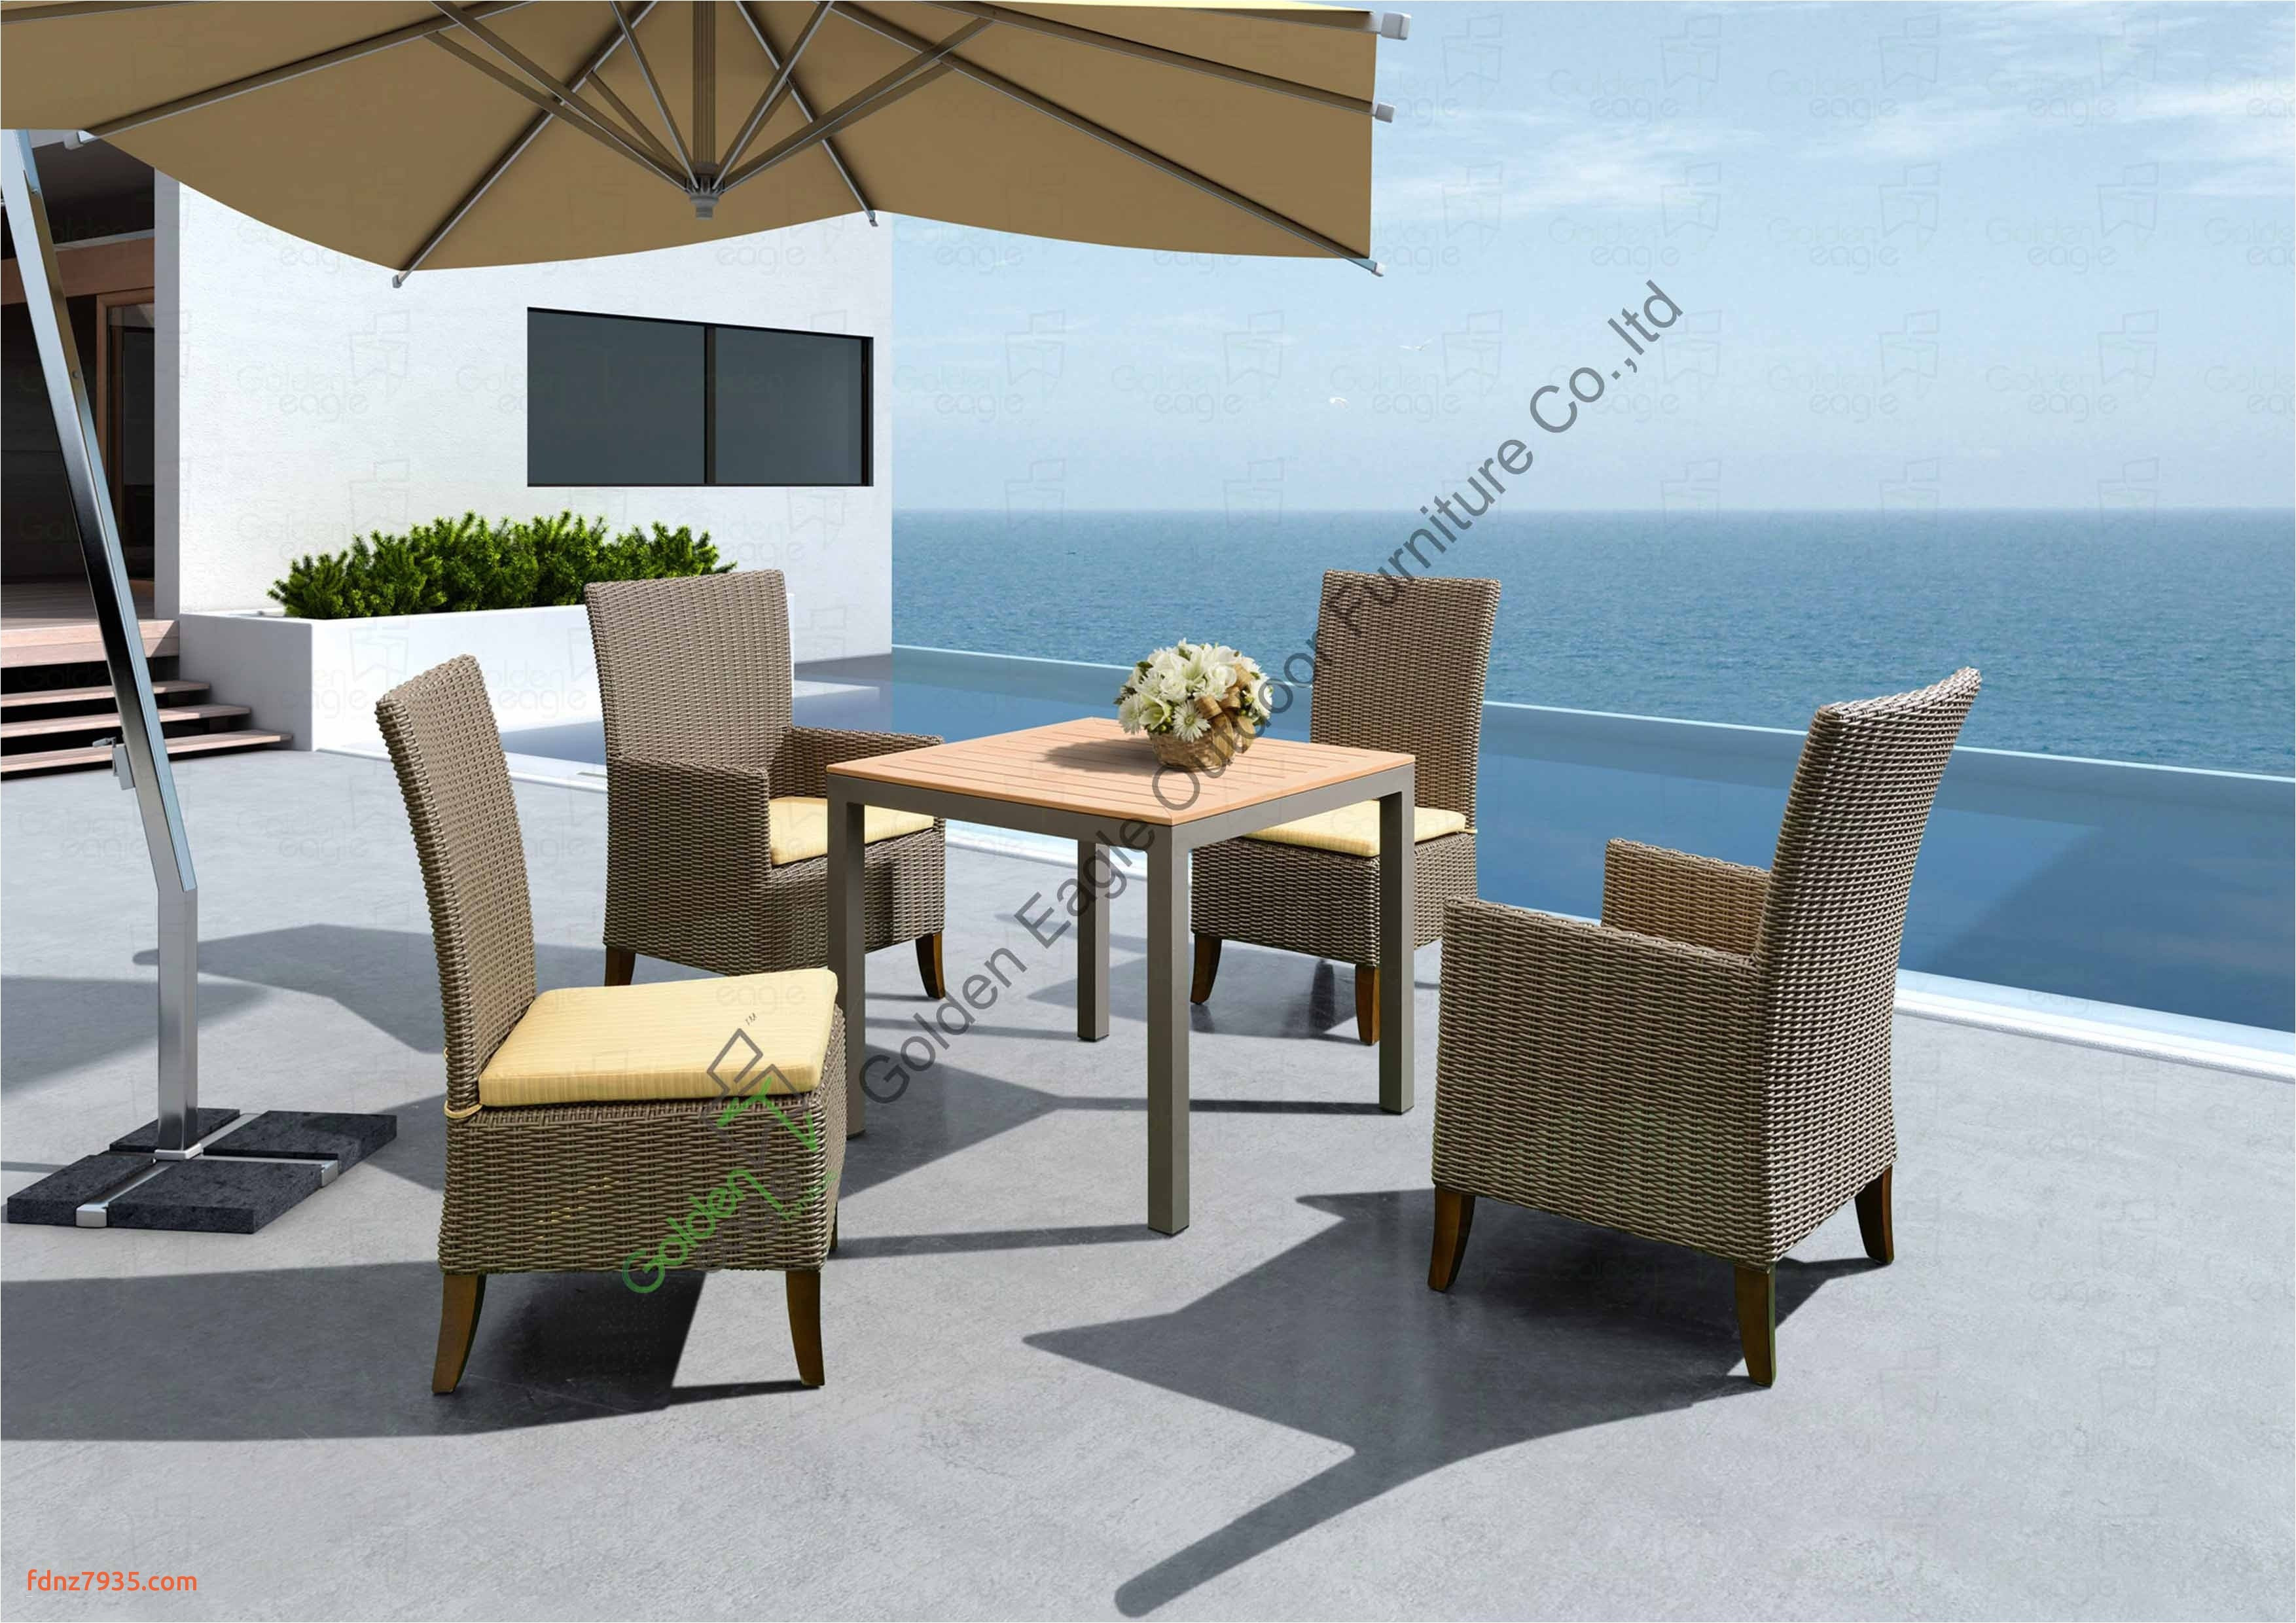 28 Awesome Floor Vase Umbrella Stand 2024 free download floor vase umbrella stand of outdoor patio set with umbrella fresh sofa design within outdoor patio umbrellas awesome high top patio furniture best wicker outdoor sofa 0d patio chairs